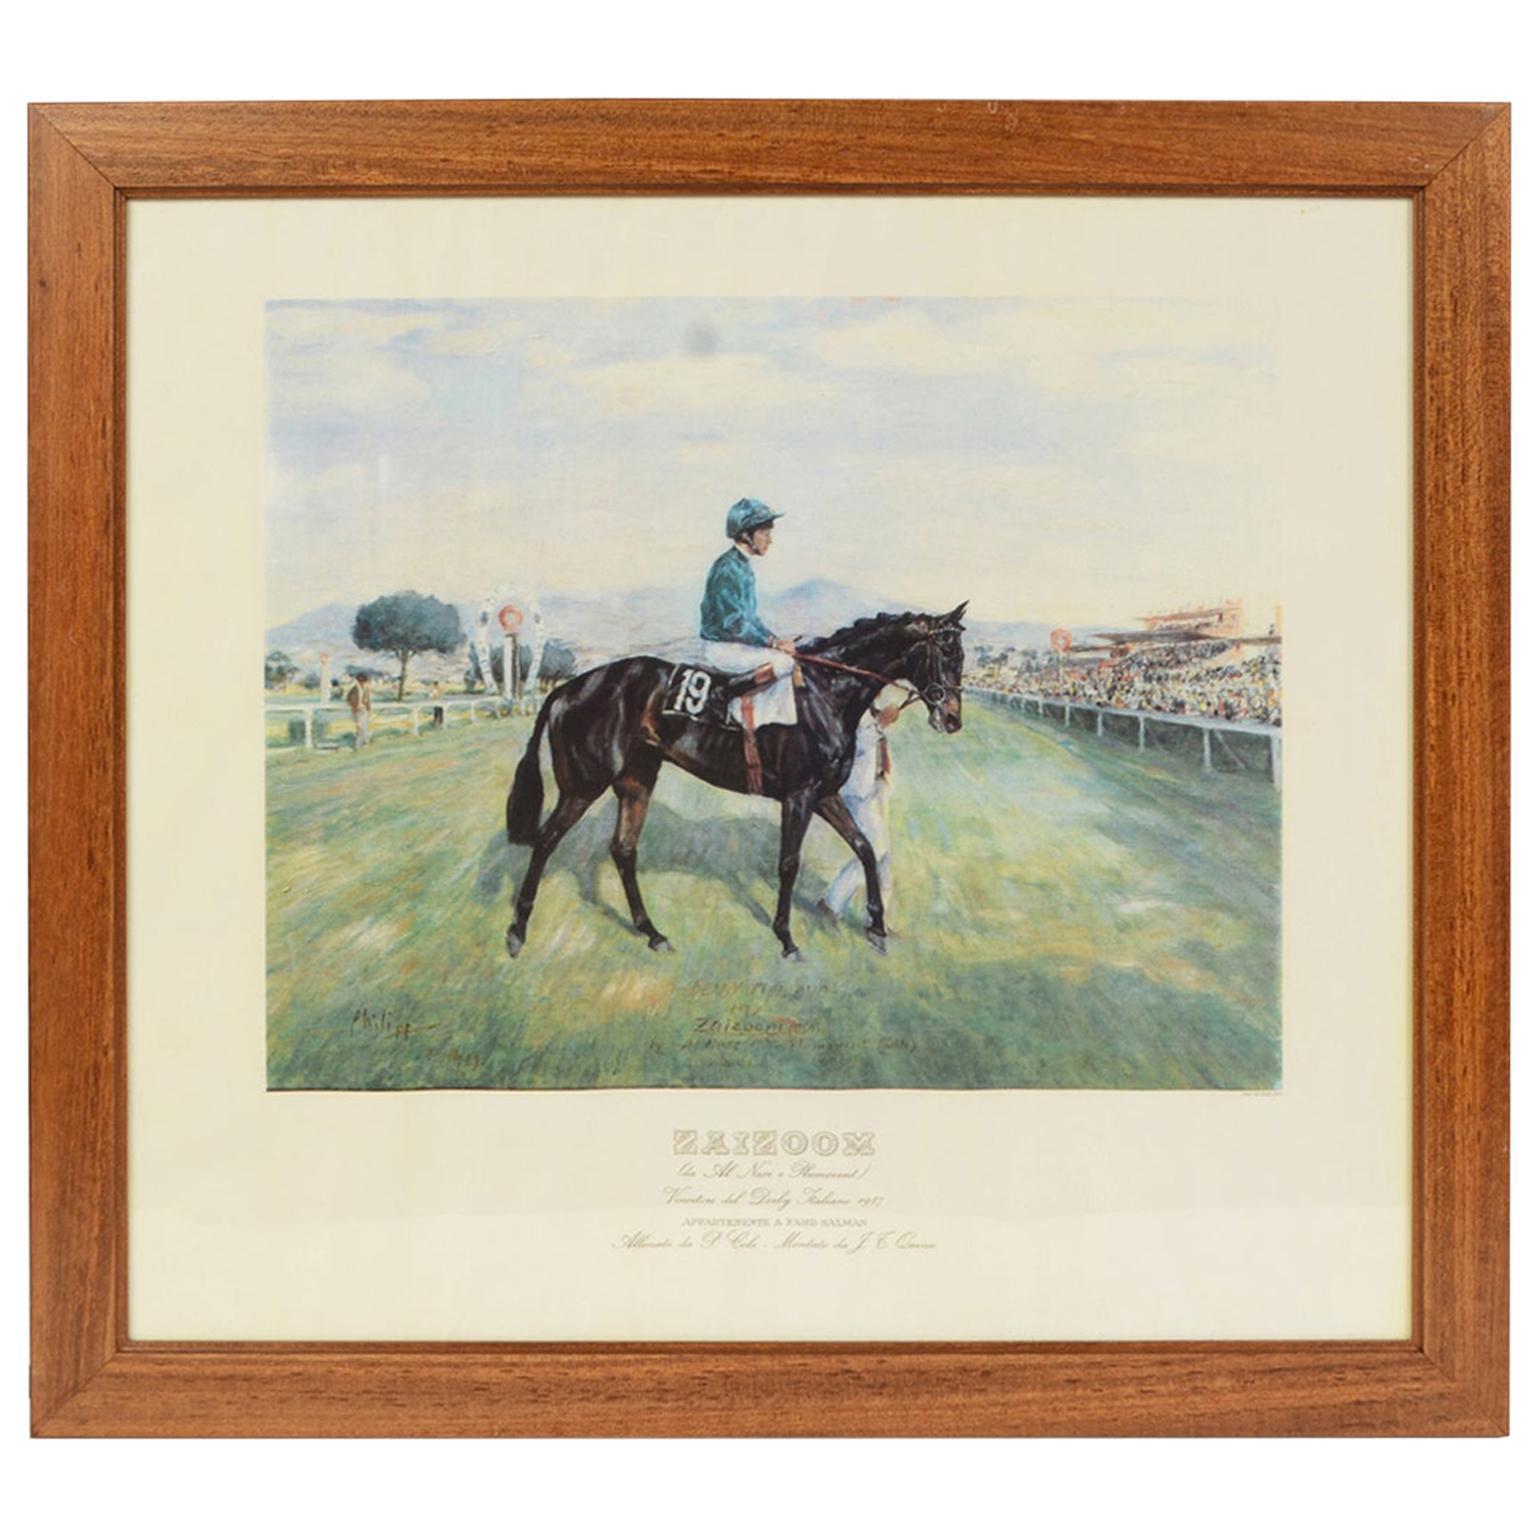 Lithograph Depicting the Horse Winner of the 1987 Italian Derby For Sale